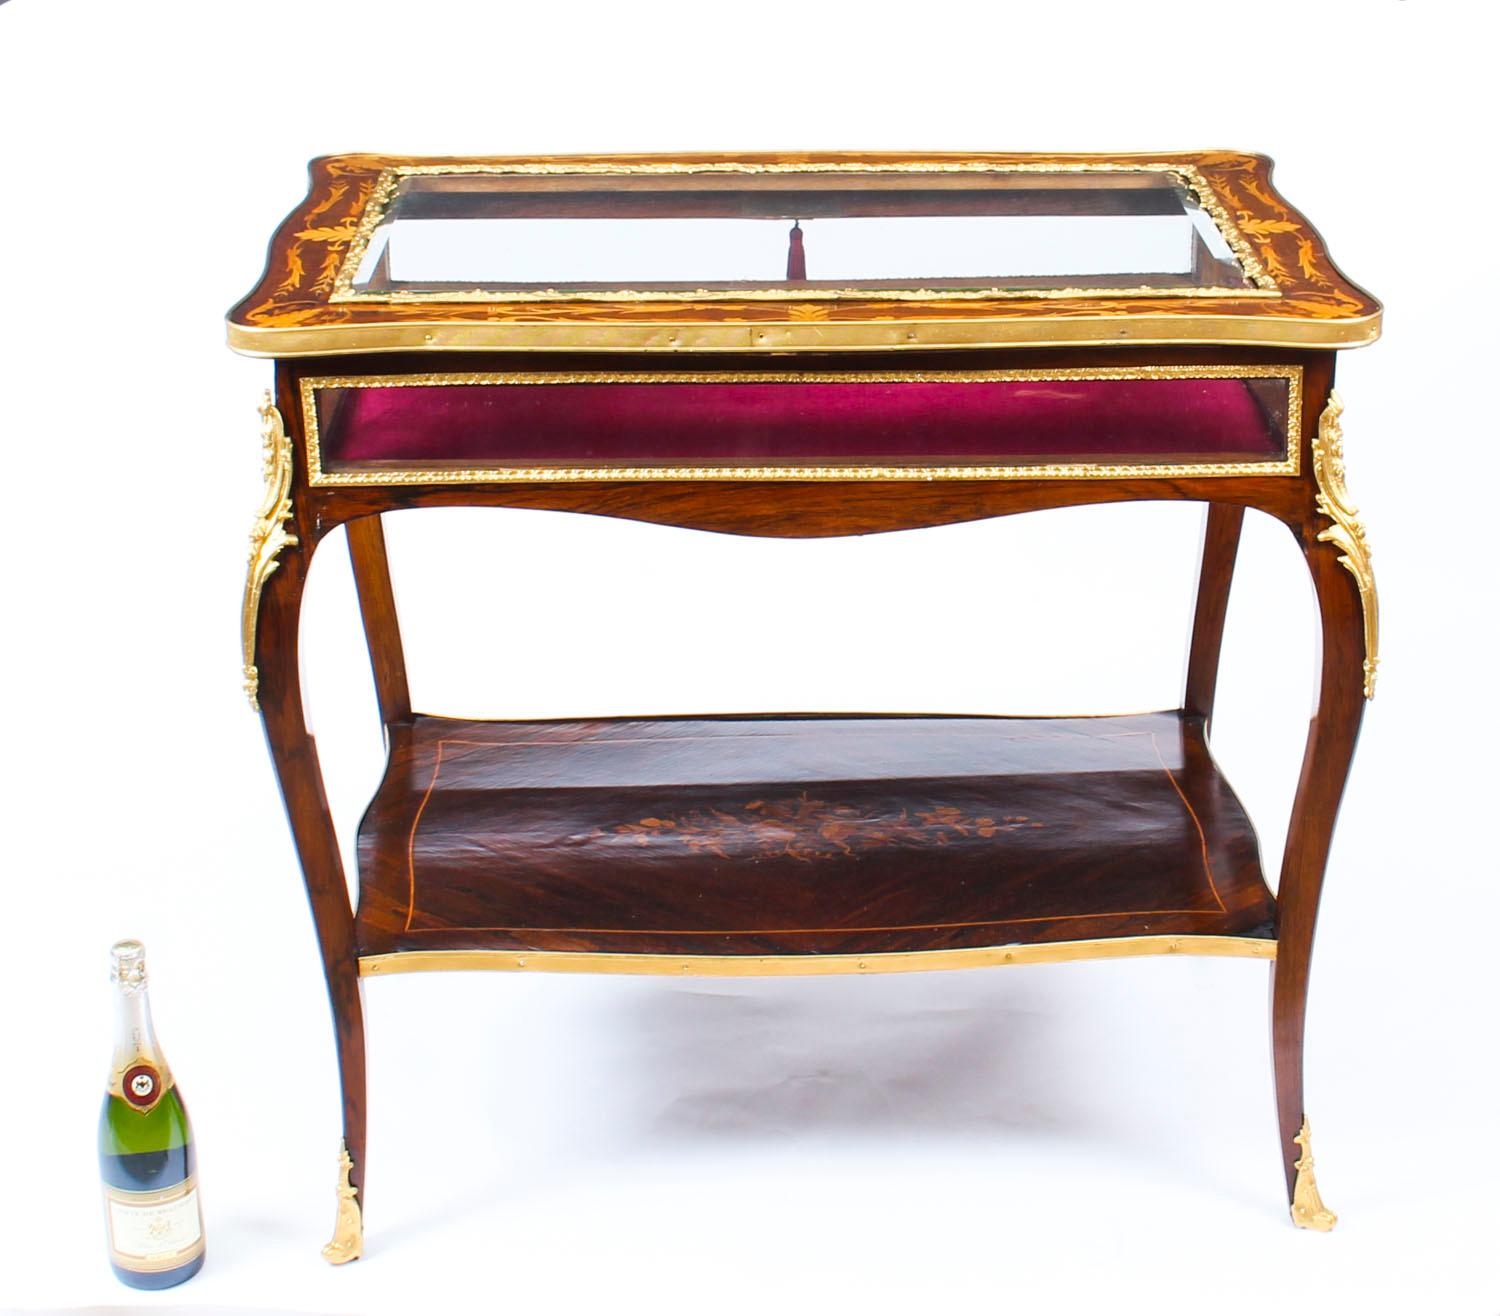 Antique French Ormolu-Mounted Marquetry Bijouterie Display Table, 19th Century 8